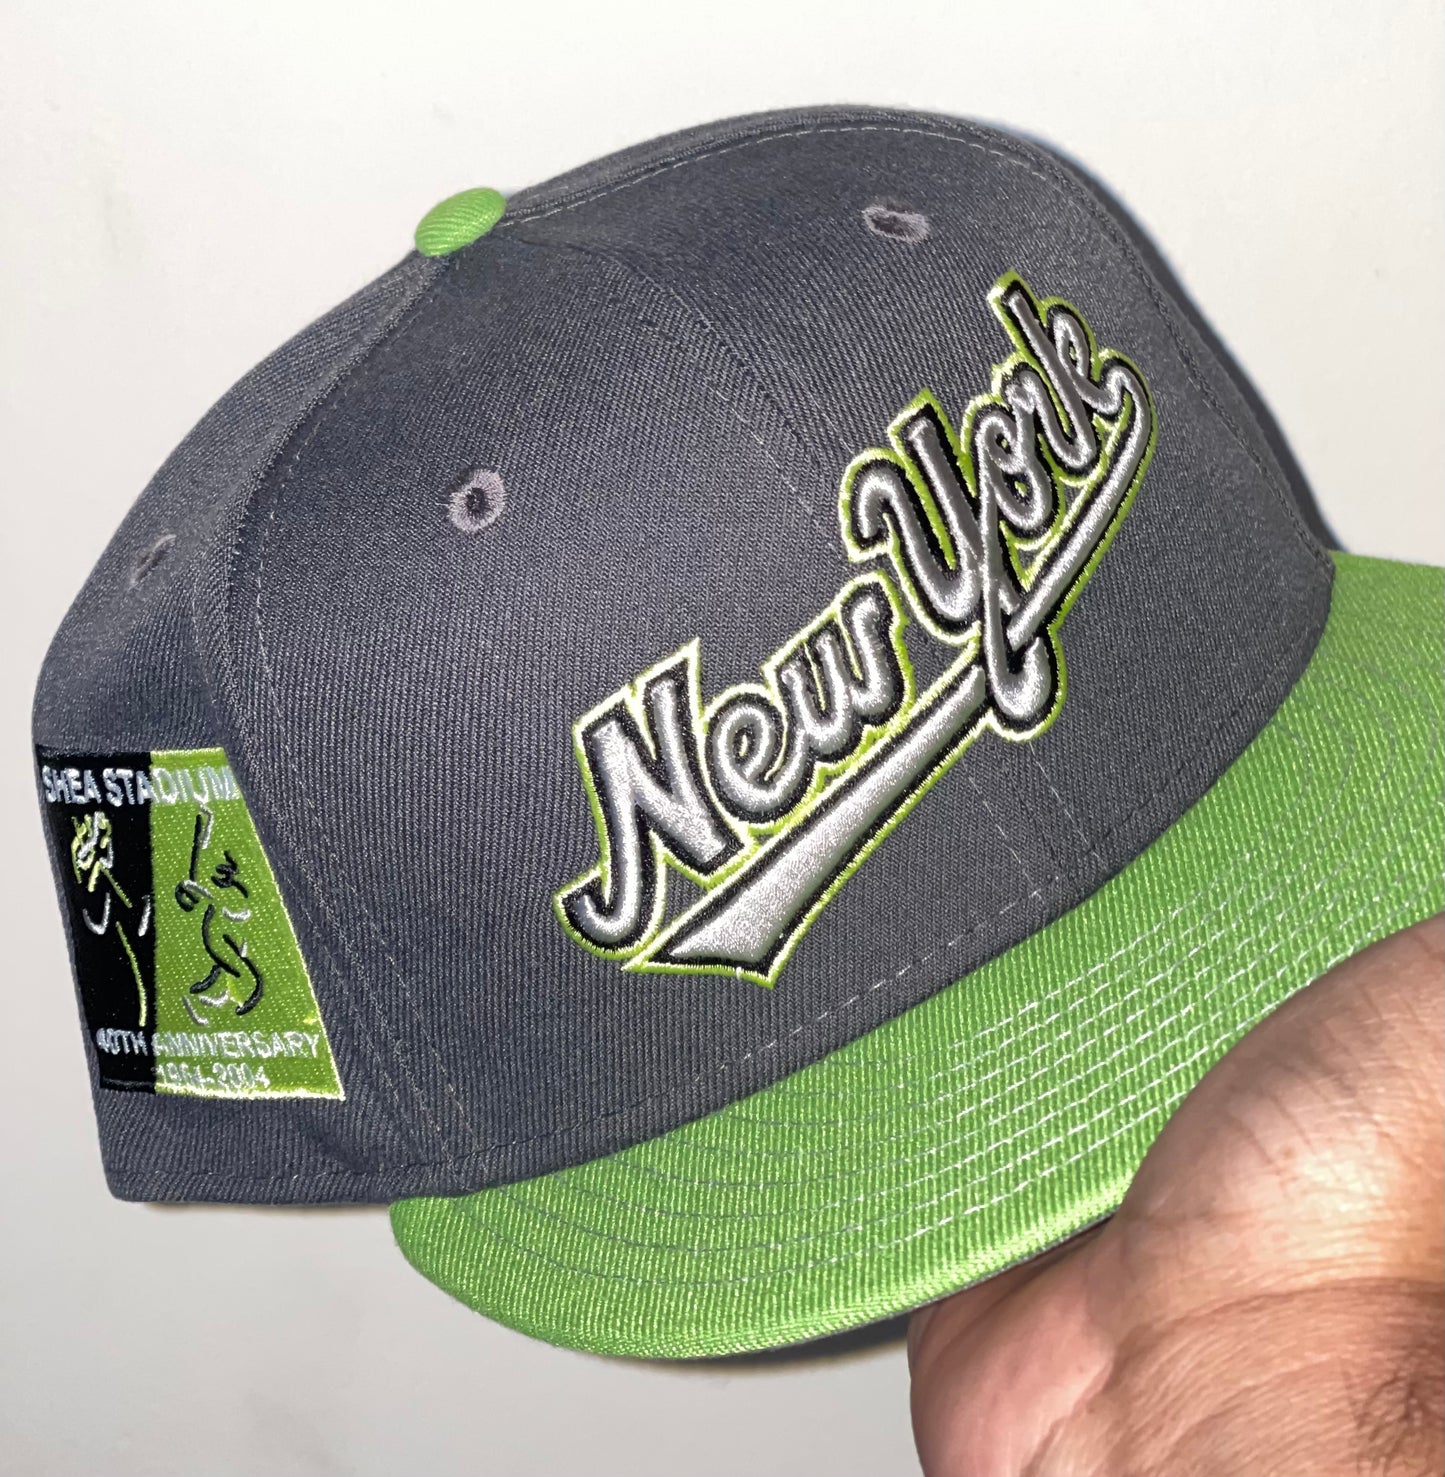 New York Mets US Open Shea Stadium 40th Anniversary Fitted Hat (Gray/Green)